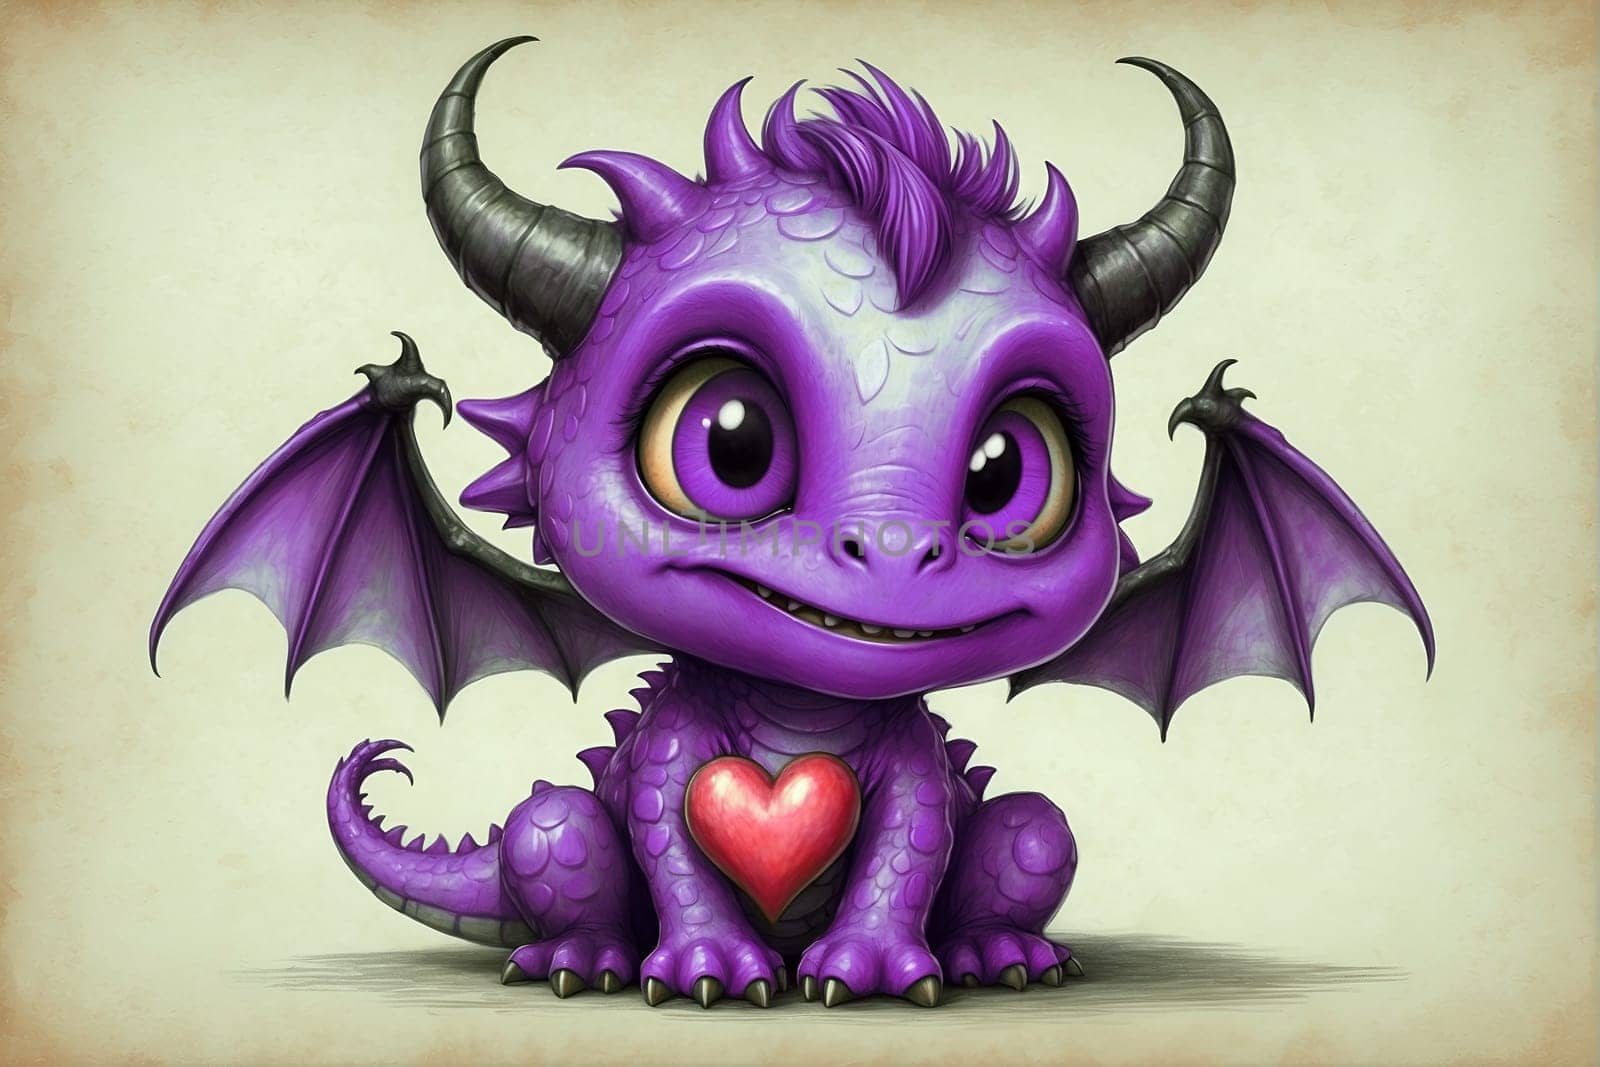 A striking purple dragon with fierce horns showcases its captivating heart-shaped markings.